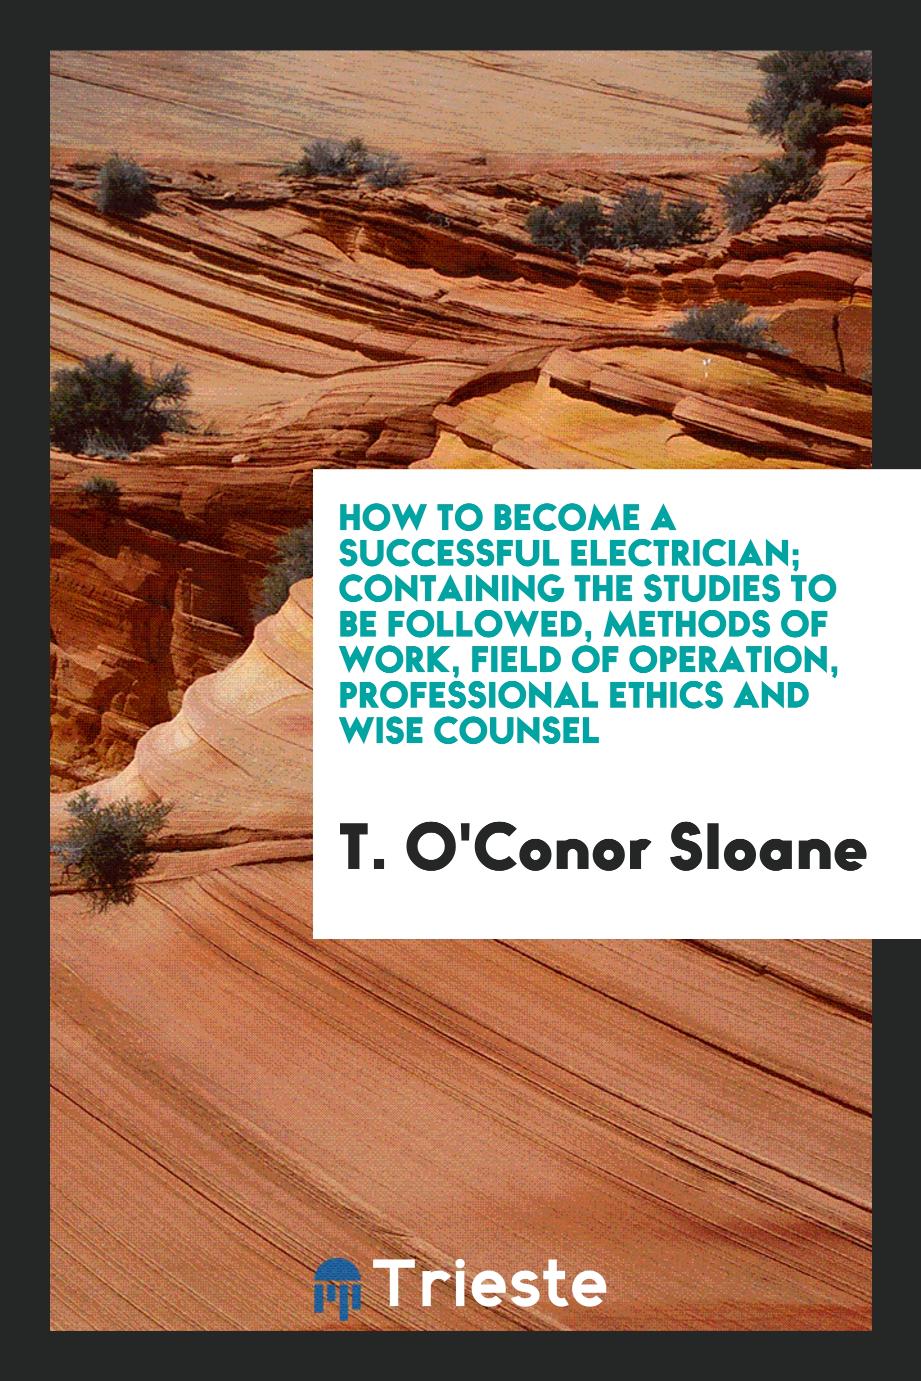 How to become a successful electrician; containing the studies to be followed, methods of work, field of operation, professional ethics and wise counsel